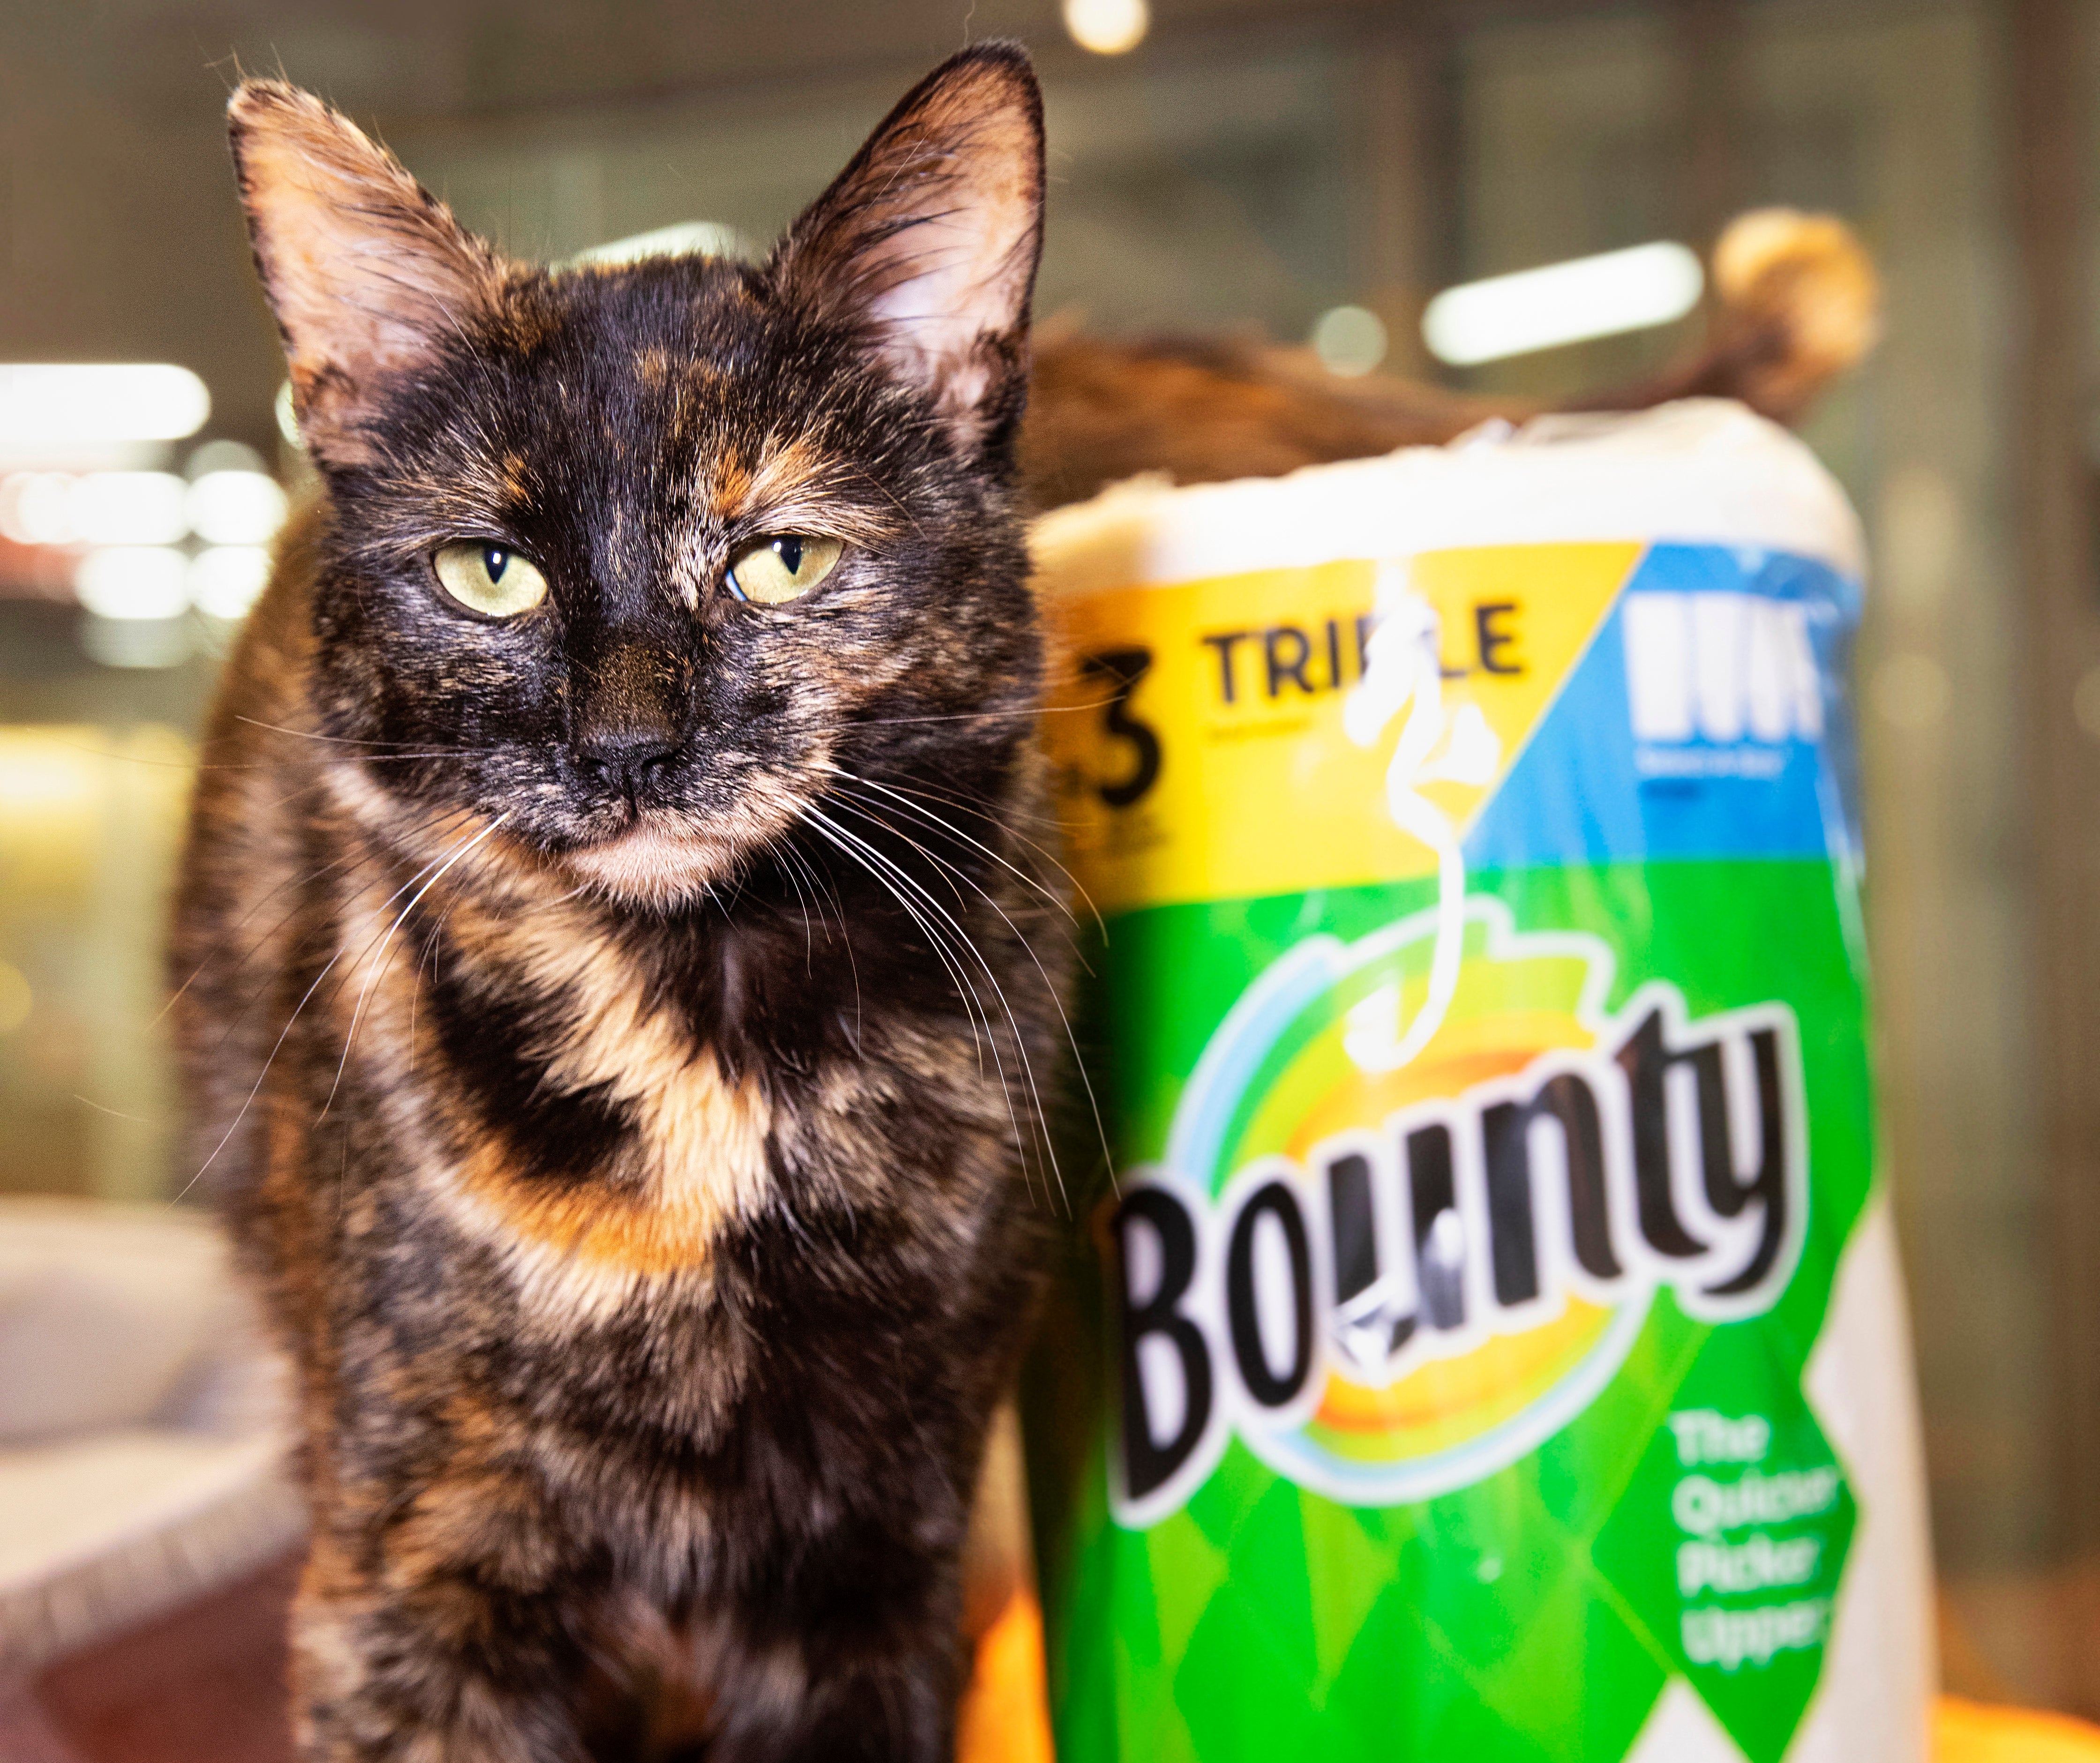 Cat standing next to roll of Bounty paper towels